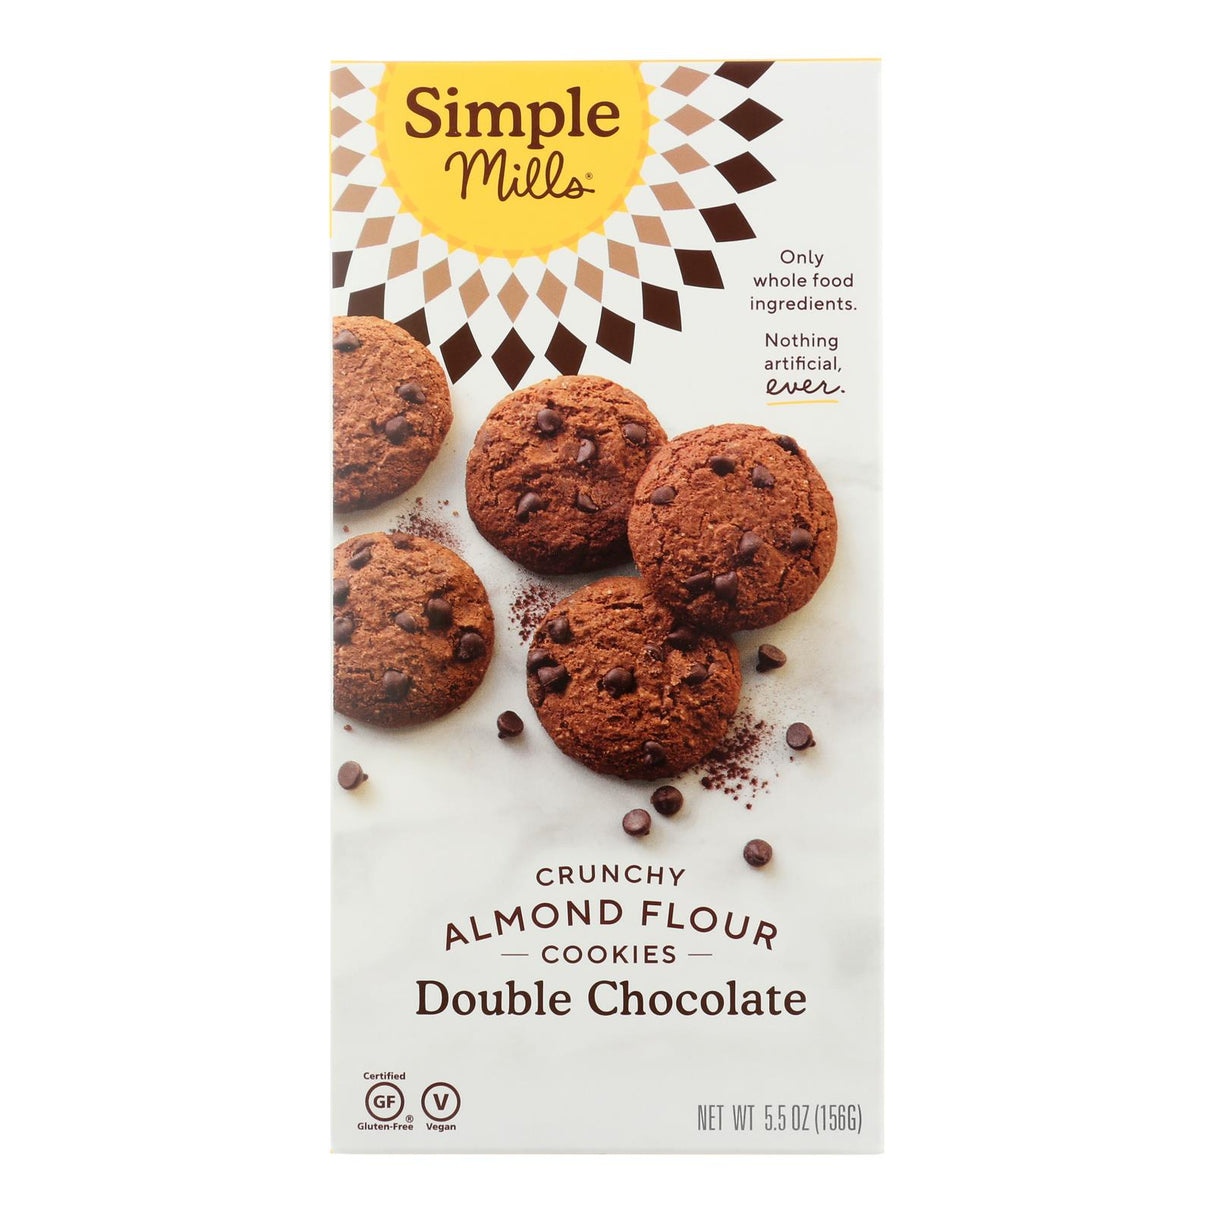 Simple Mills Cookies - Crunchy Double Chocolate - Case Of 6 - 5.5 Oz